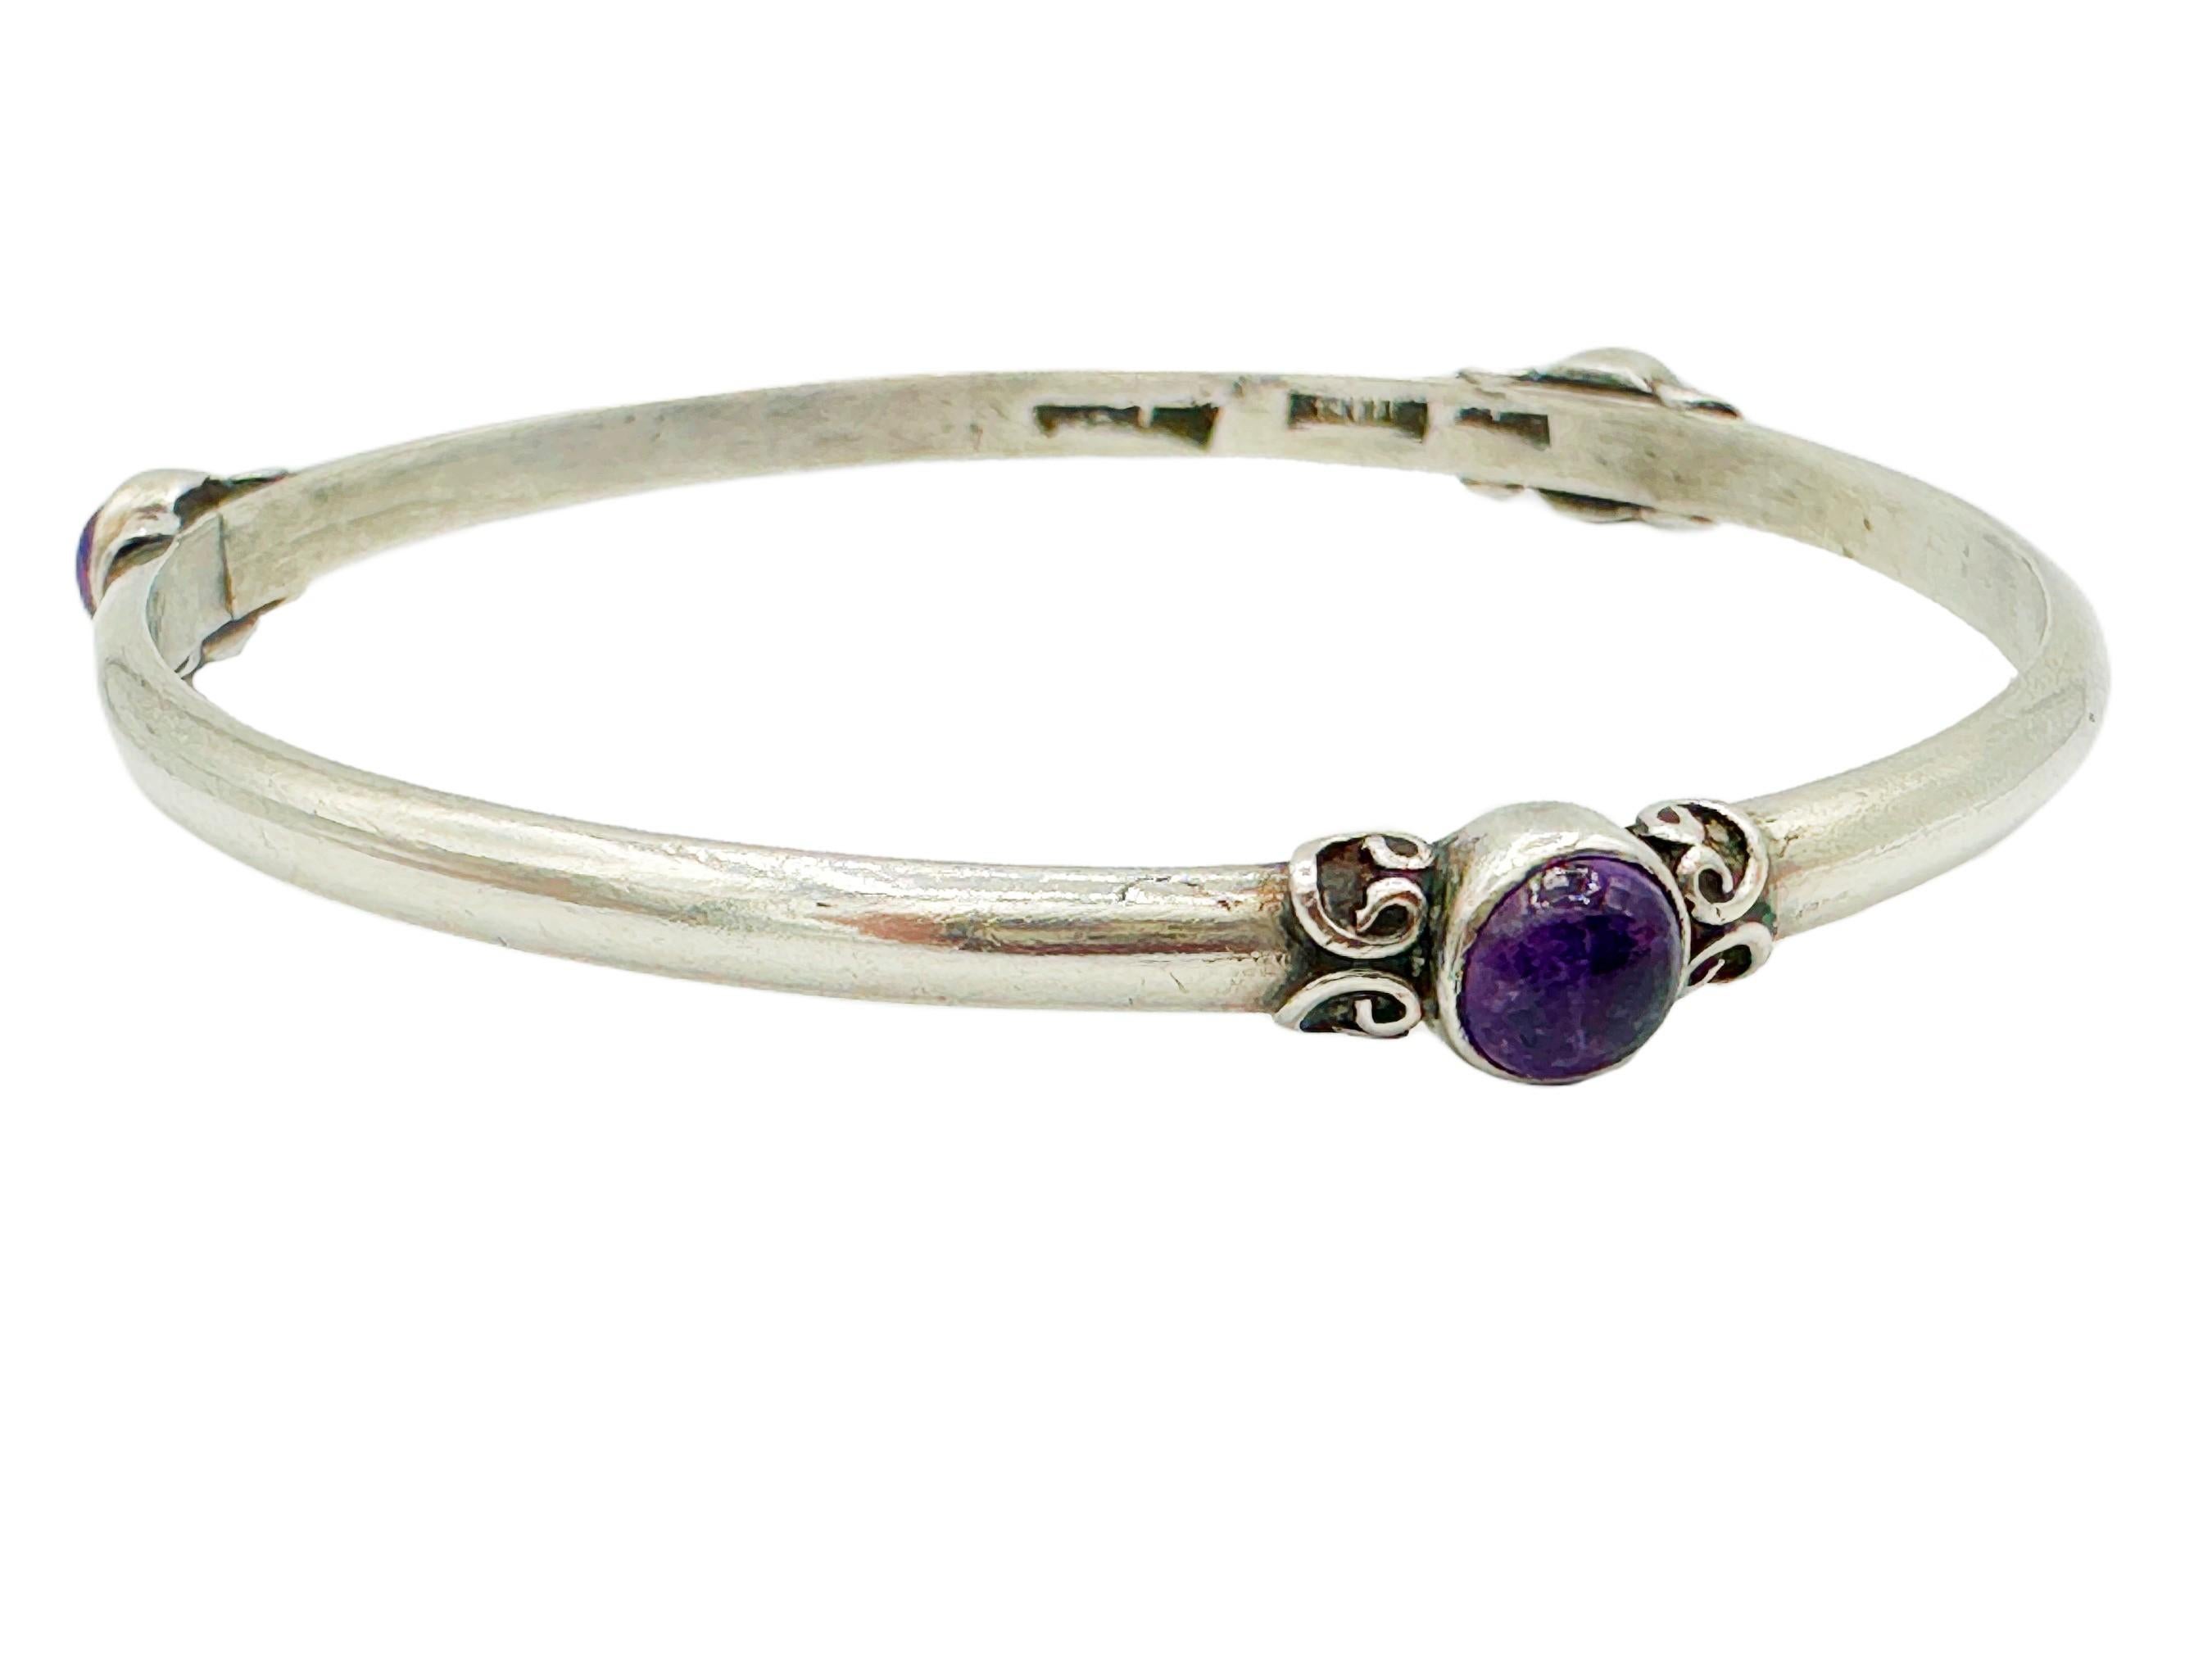 This vintage 1970s gemstone and sterling silver bangle bracelet features three bezel-set amethyst cabochons flanked with decorative silver scrollwork. It's a classic, versatile piece that's perfect for everyday wear. Each amethyst is approximately